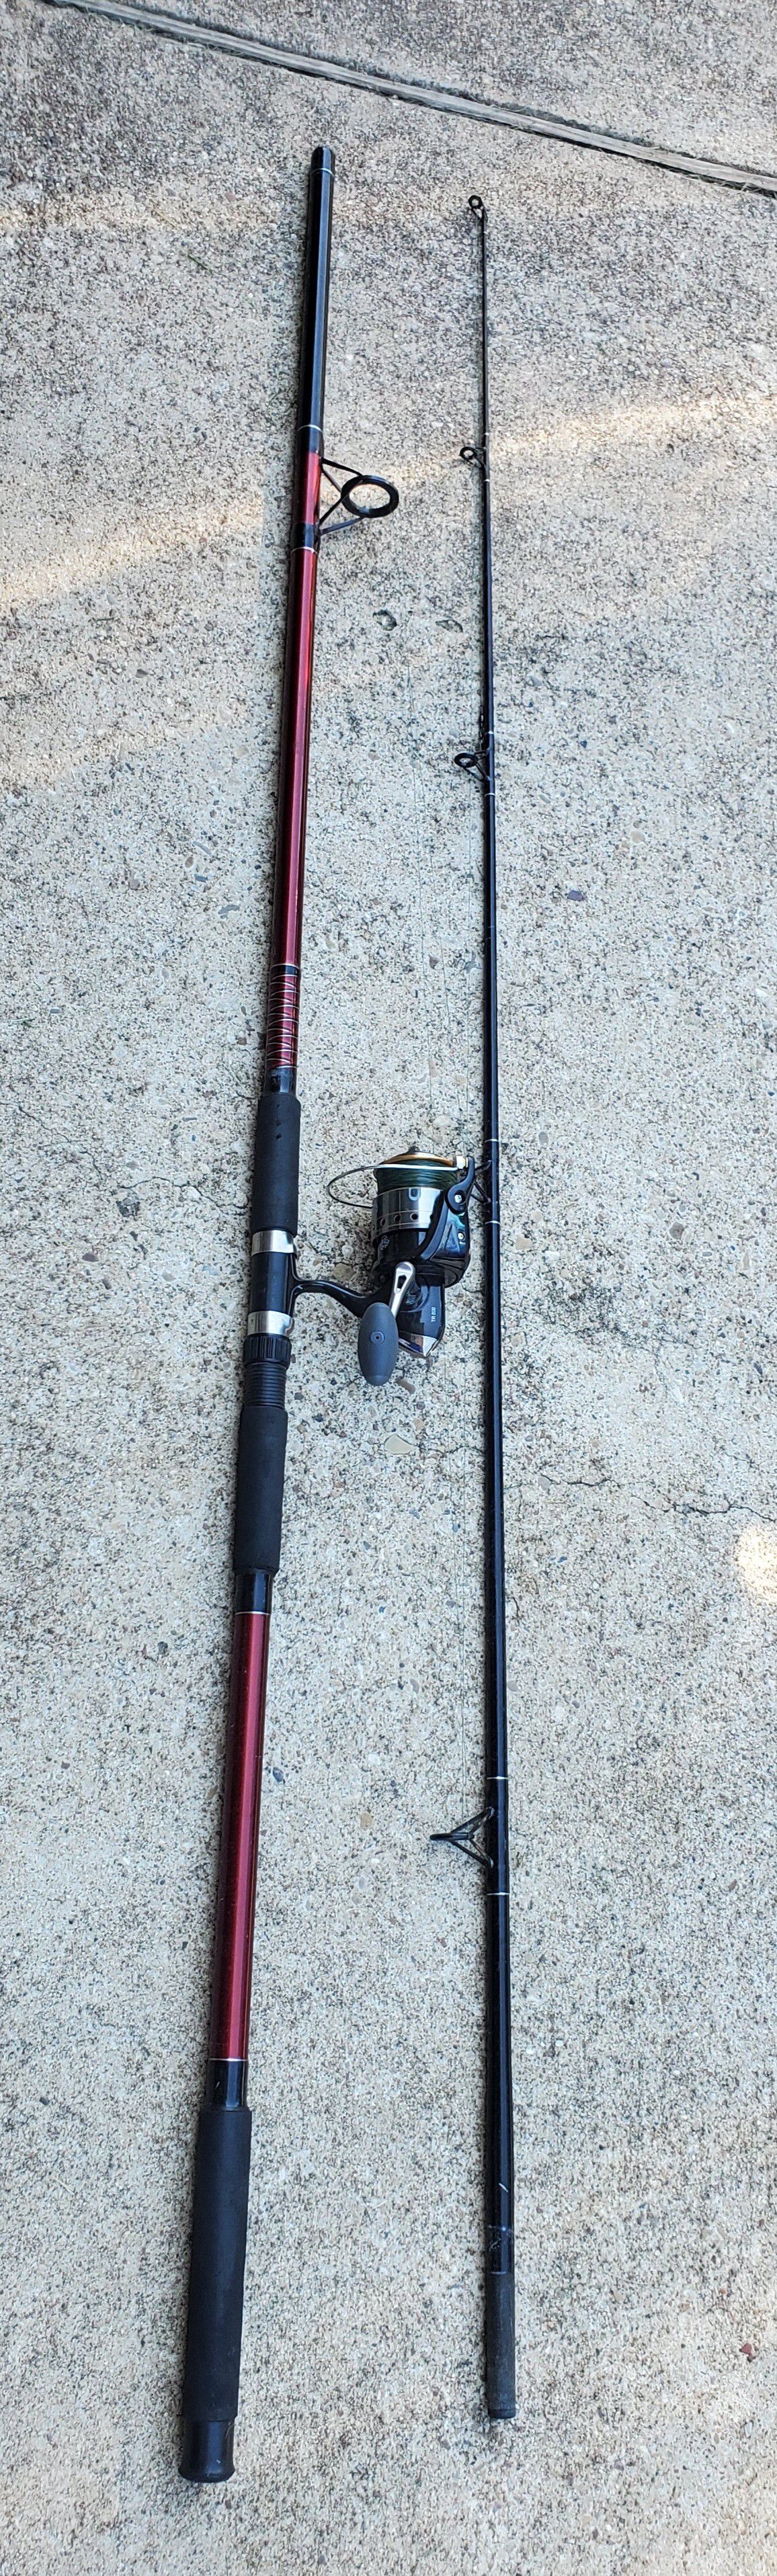 Fishing Pinnacle Red Metal 12 Foot Spinning Rod and Reel Combo